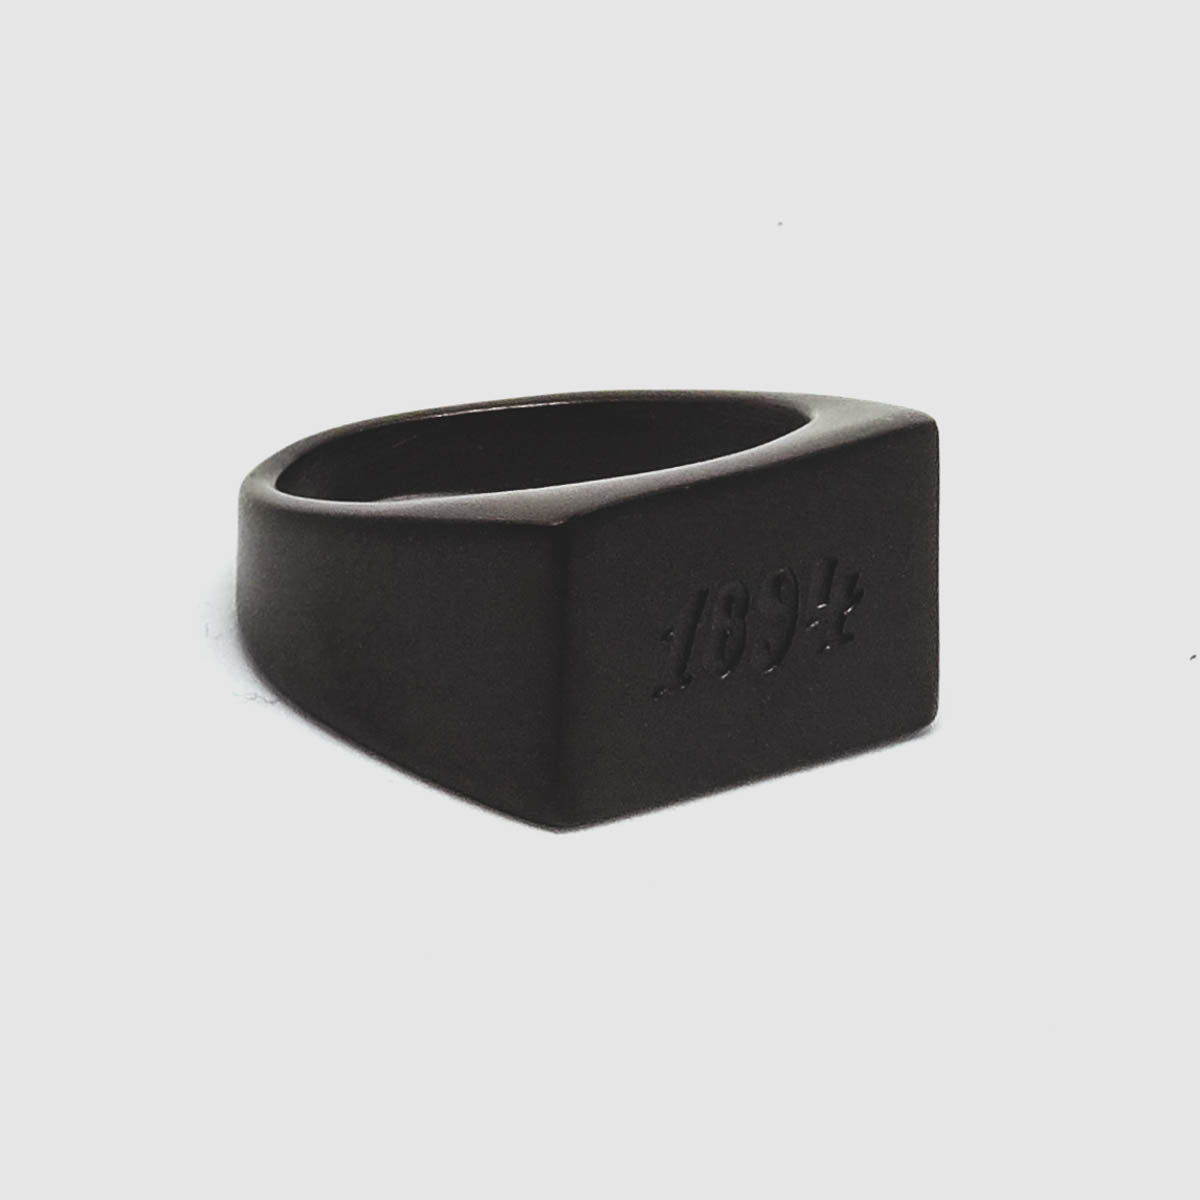 Foundation Ring In Carbon Black